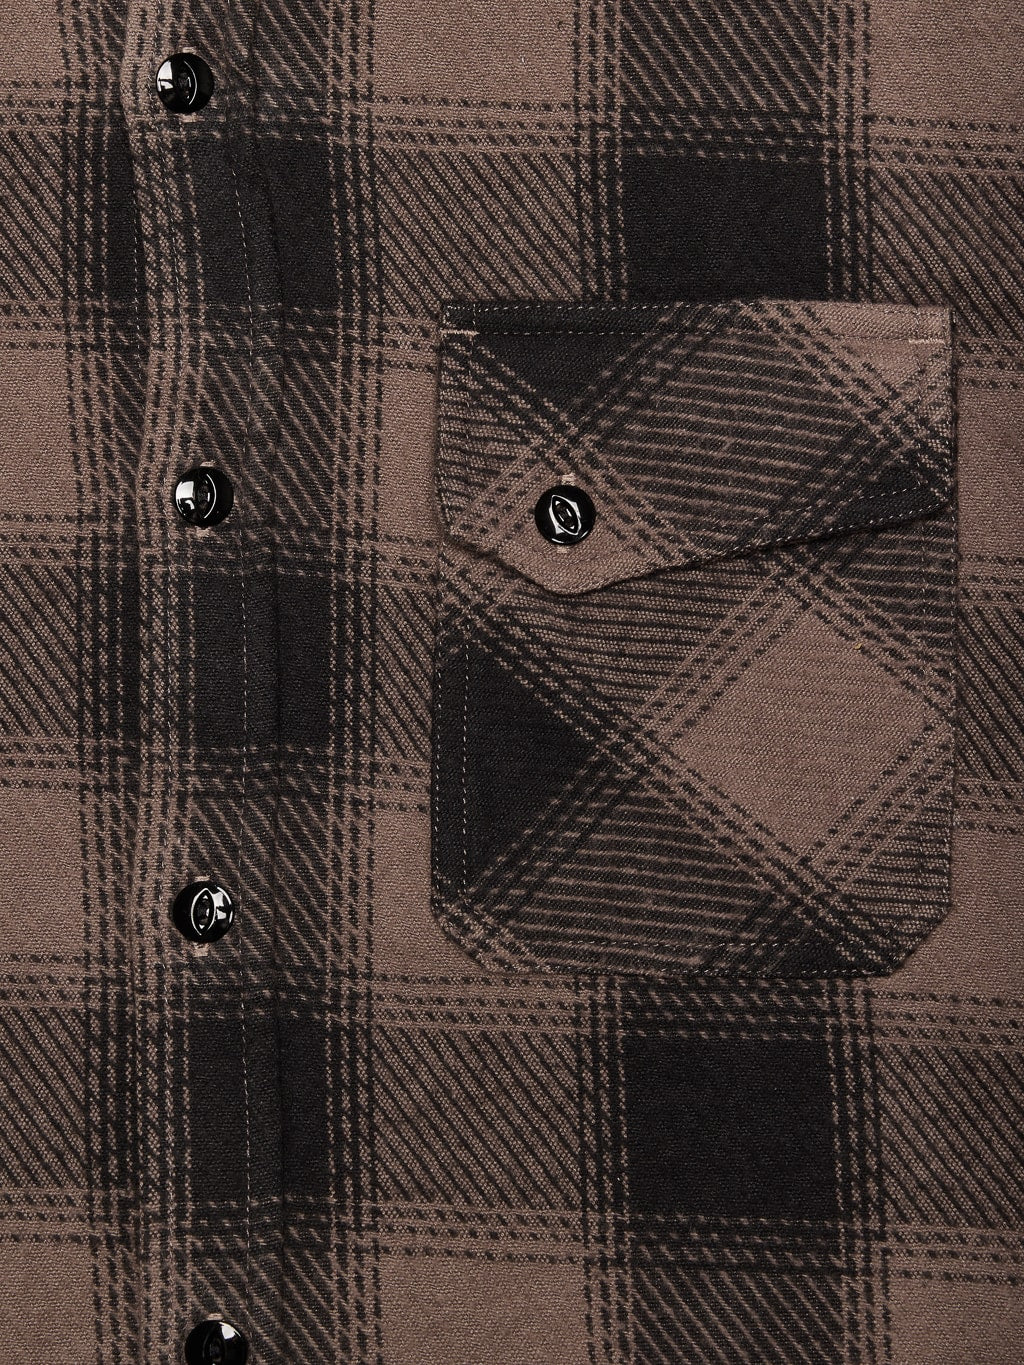 3sixteen Crosscut Flannel Charcoal Twill Plaid  chest detail